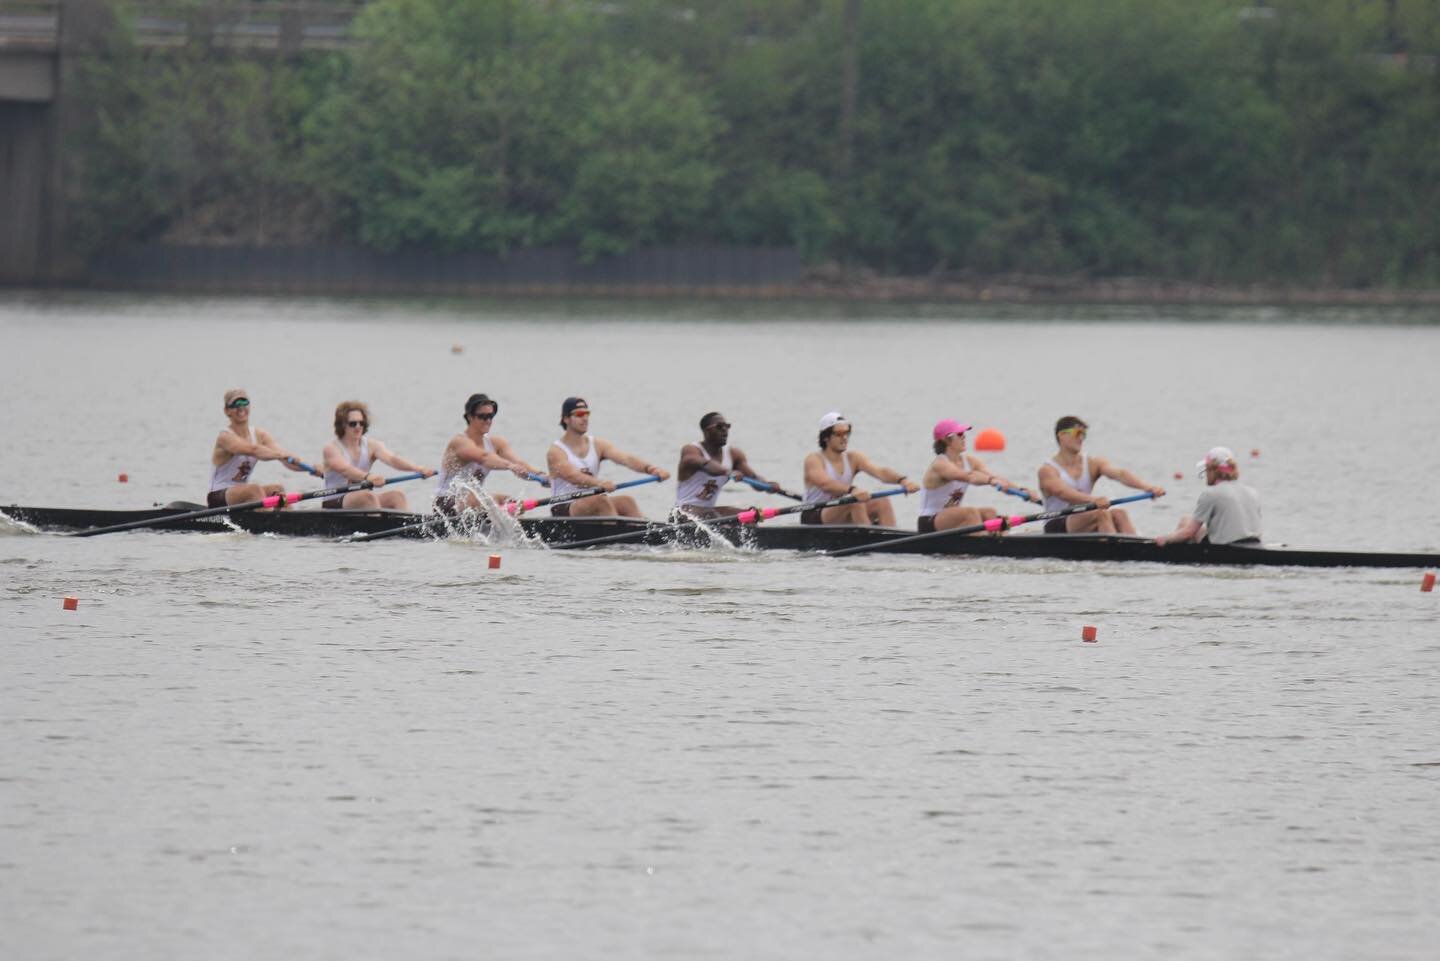 After a weekend packed with racing, @lehighrowing come away with Men&rsquo;s Crew of the Week for their V8!

Lehigh showed fine form to finish on top of all MARC competitors at the Knecht Cup this weekend by a comfortable margin!

Congratulations @le